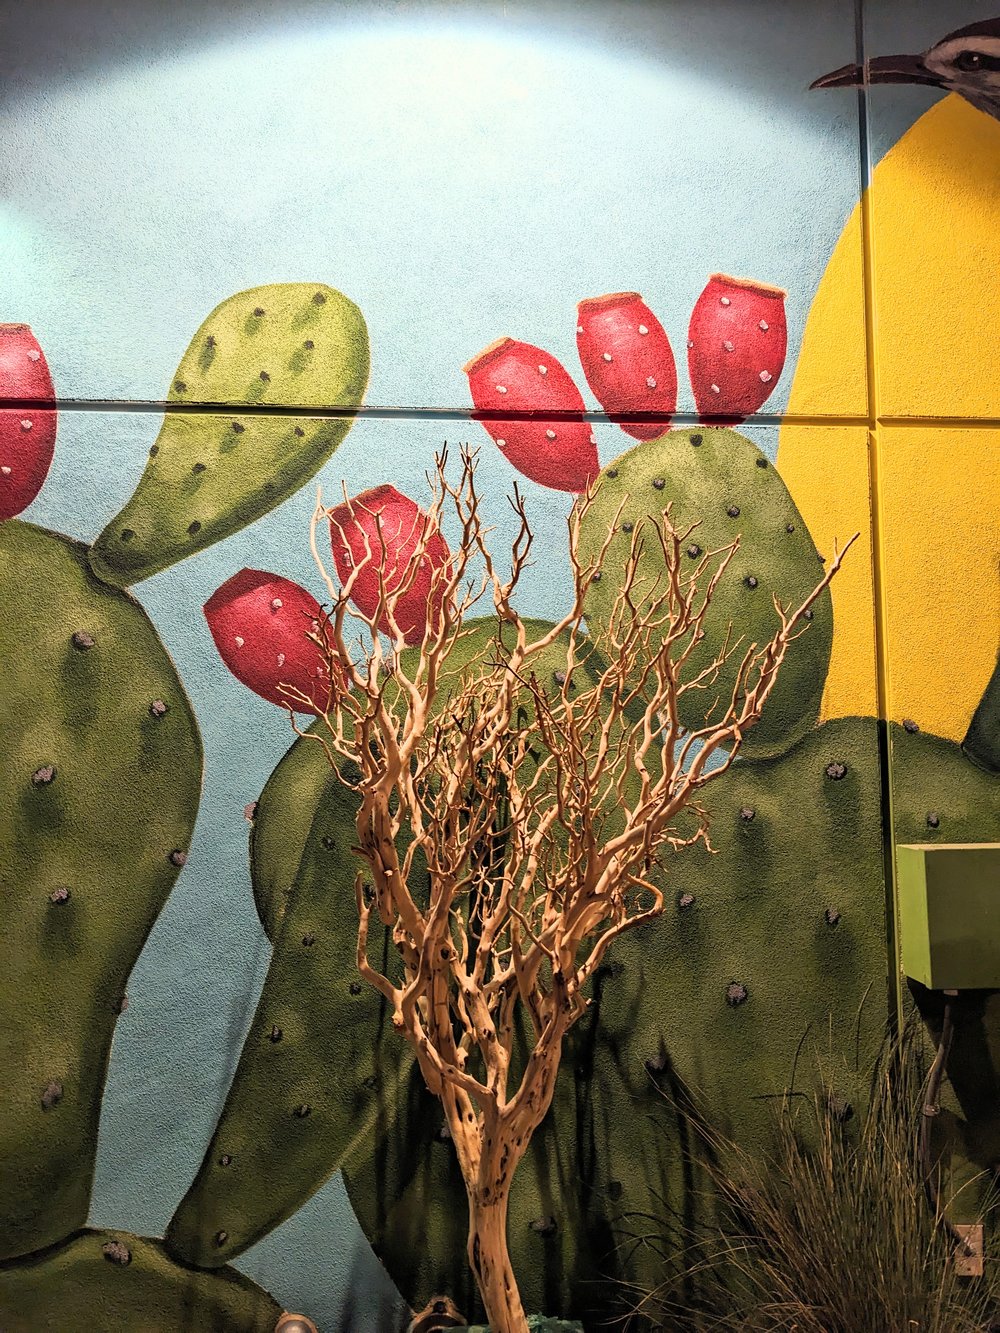 Mural of cactus with native plants in front